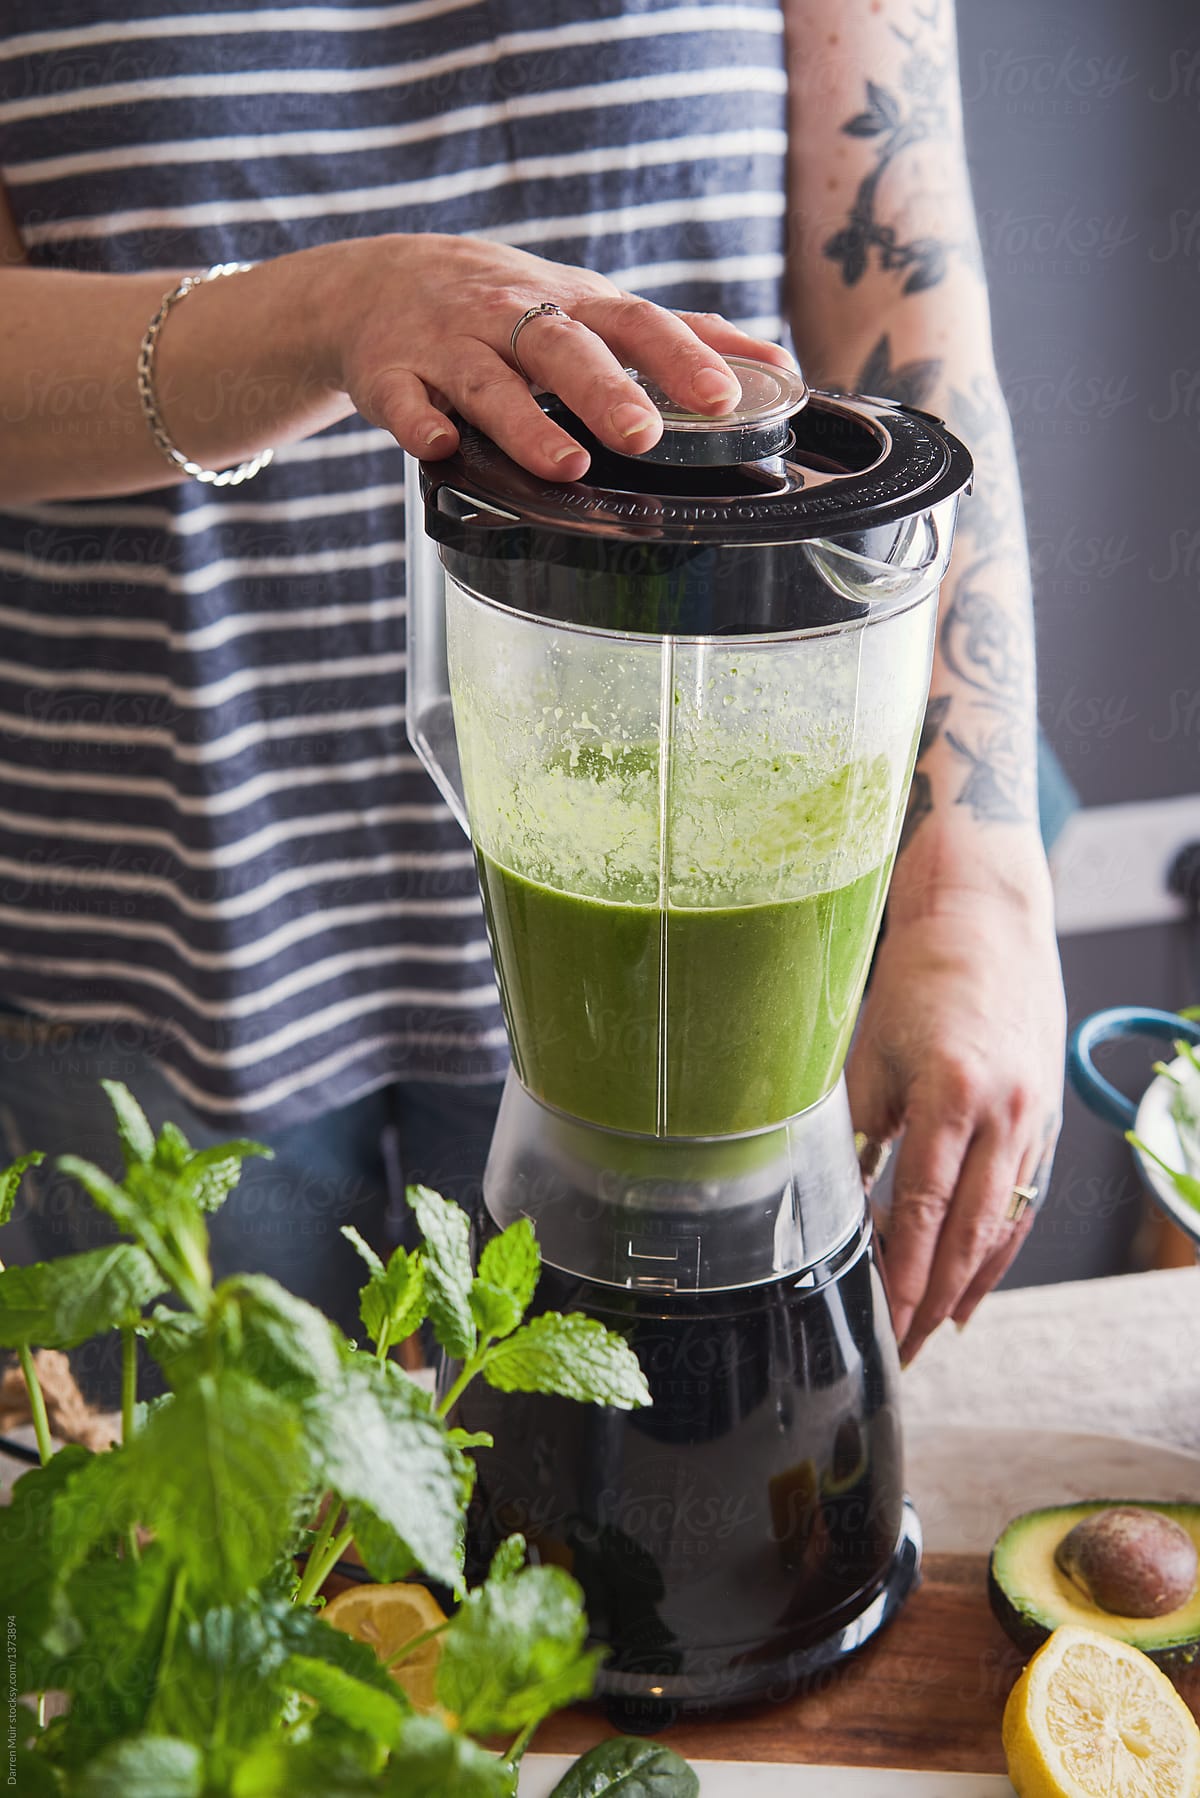 Woman using a blender to prepare a healthy detox smoothie drink.